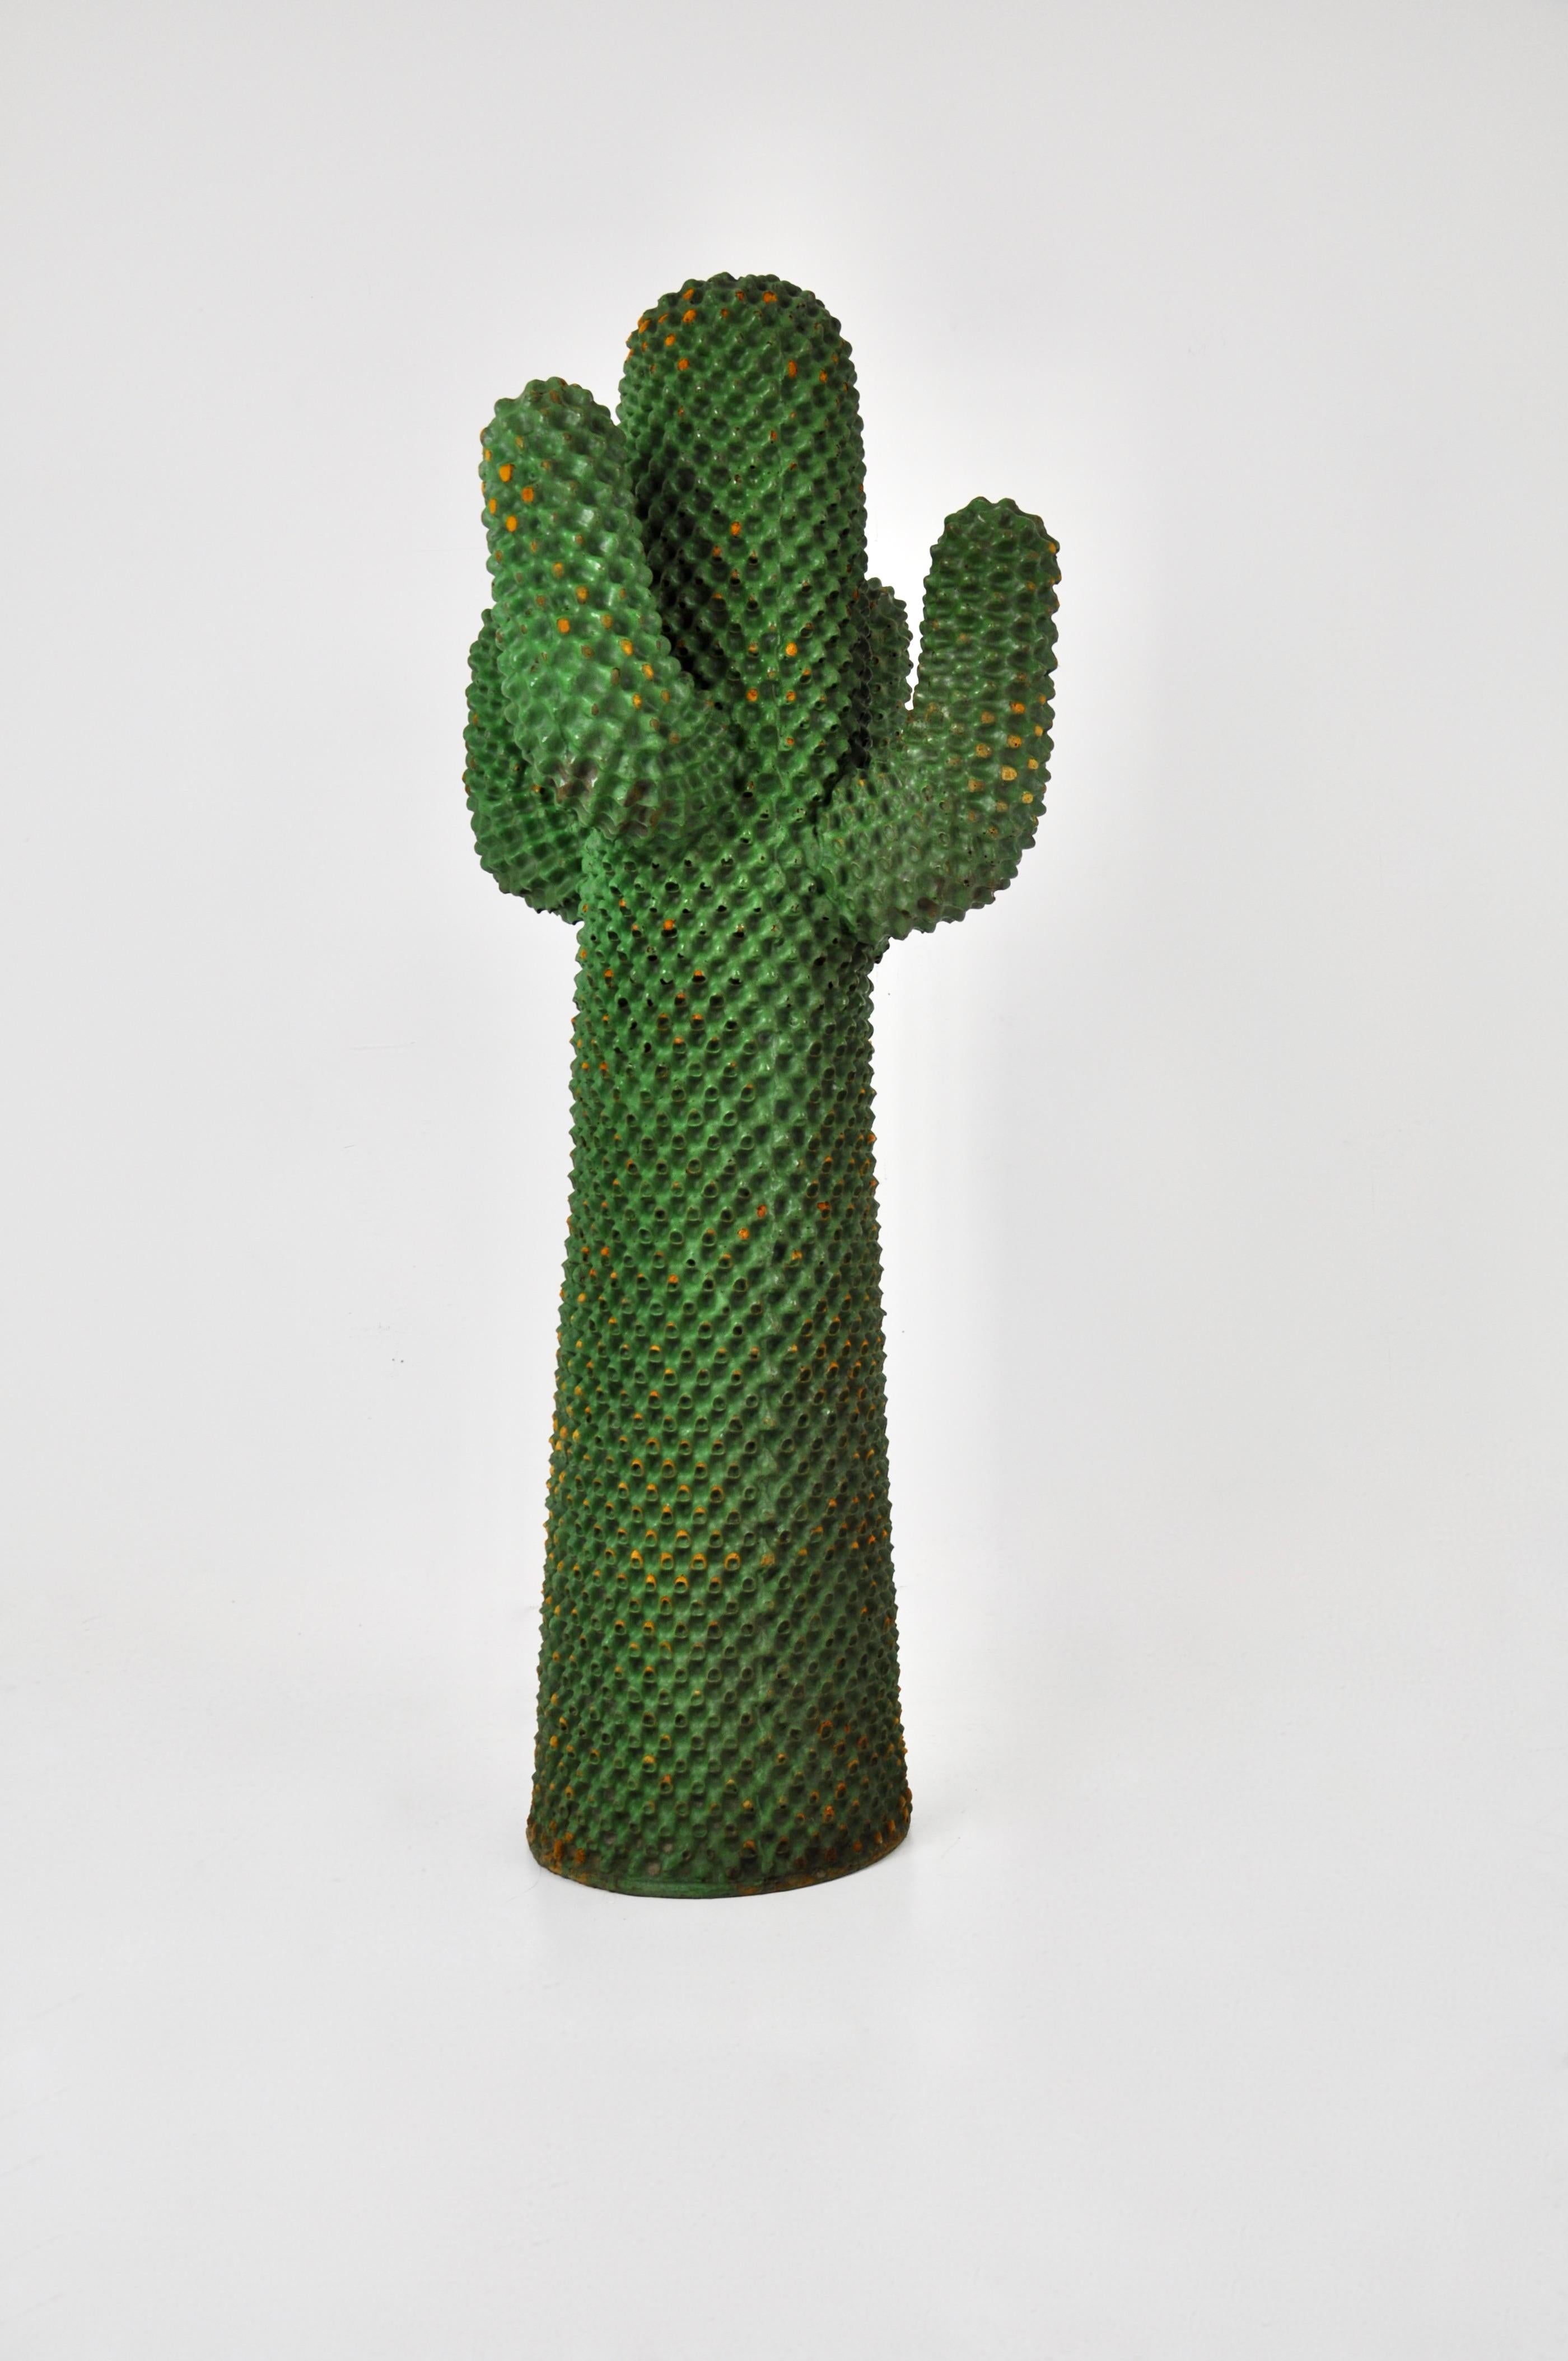 Mid-Century Modern First Edition, Cactus Coat Rack by Guido Drocco and Franco Mello for Gufram 1968 For Sale